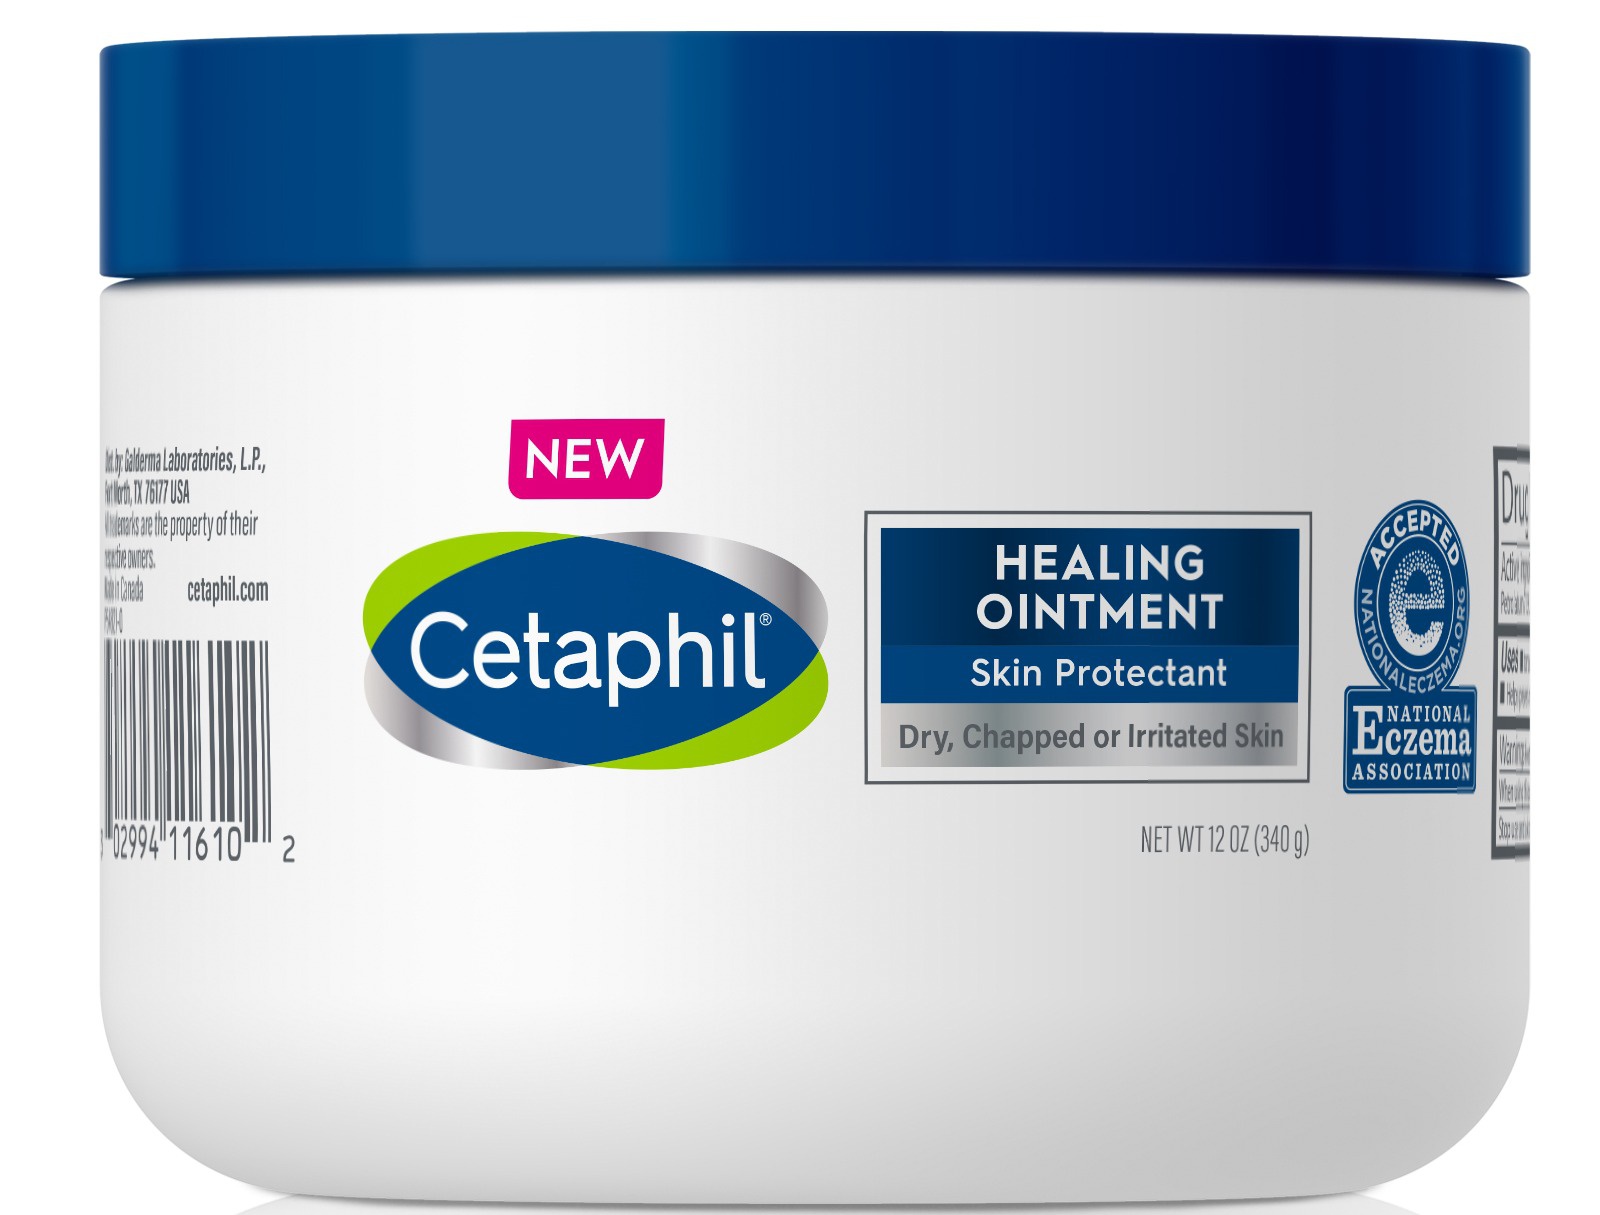 Cetaphil Healing Ointment